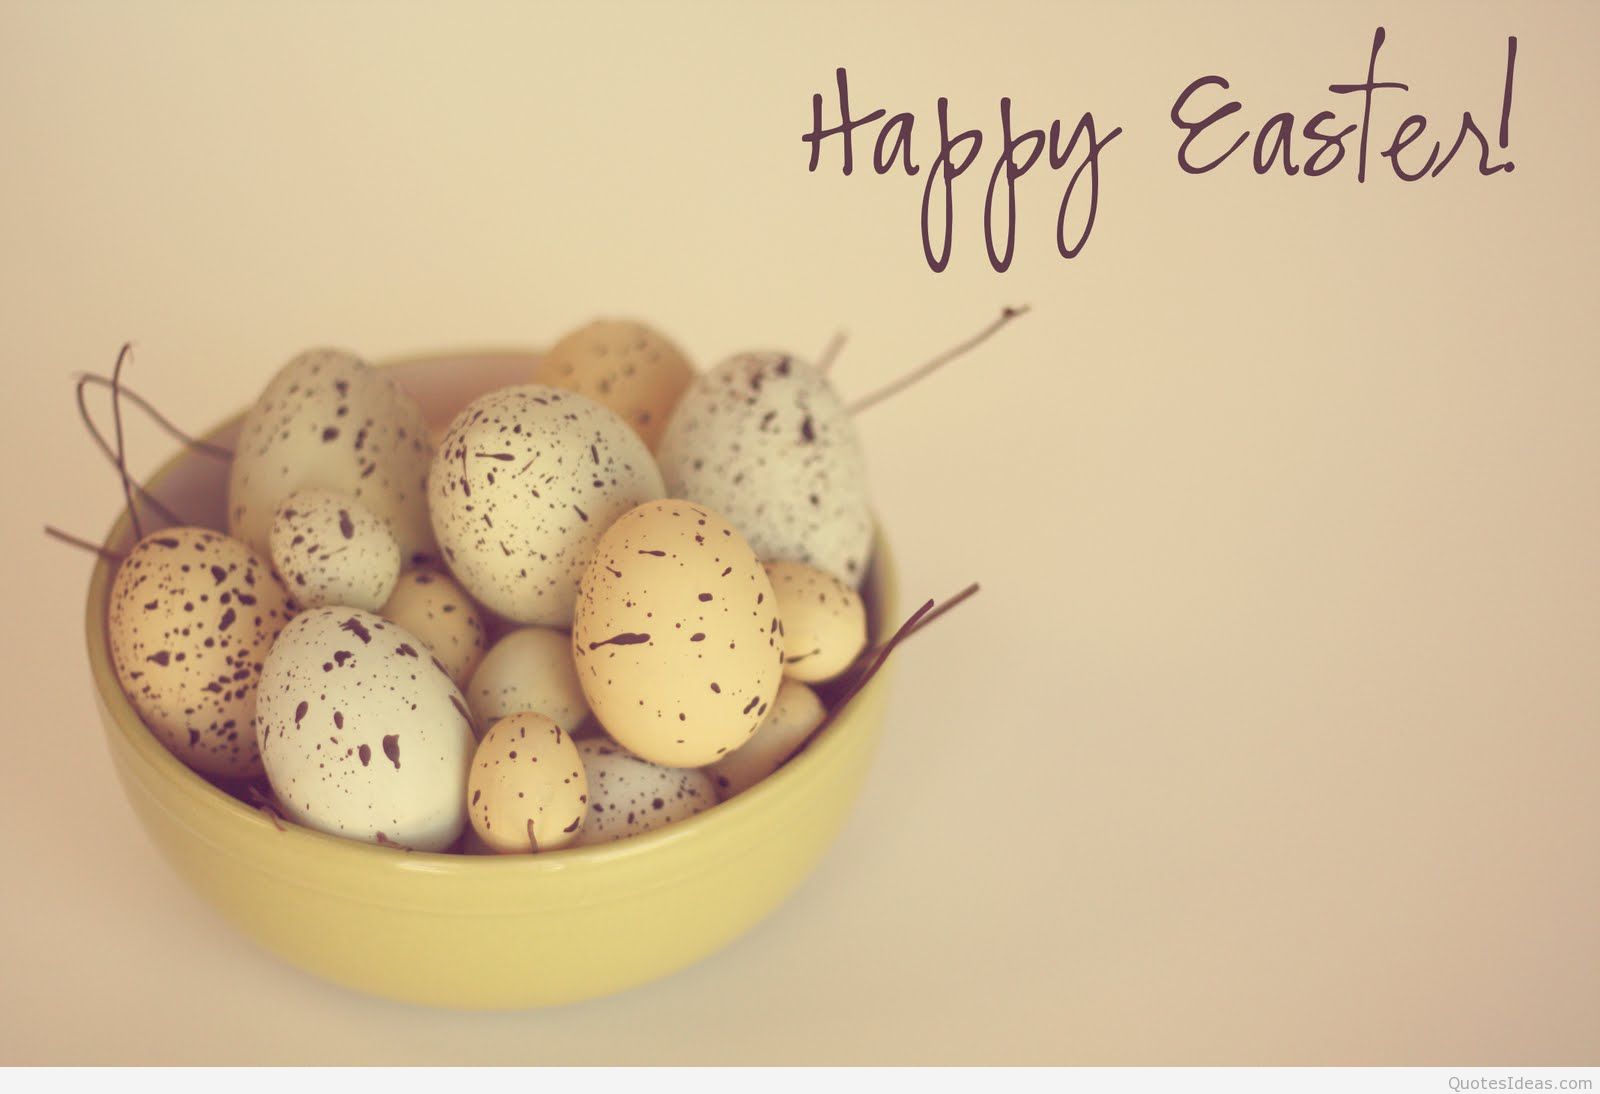 wallpapers happy easter 2015